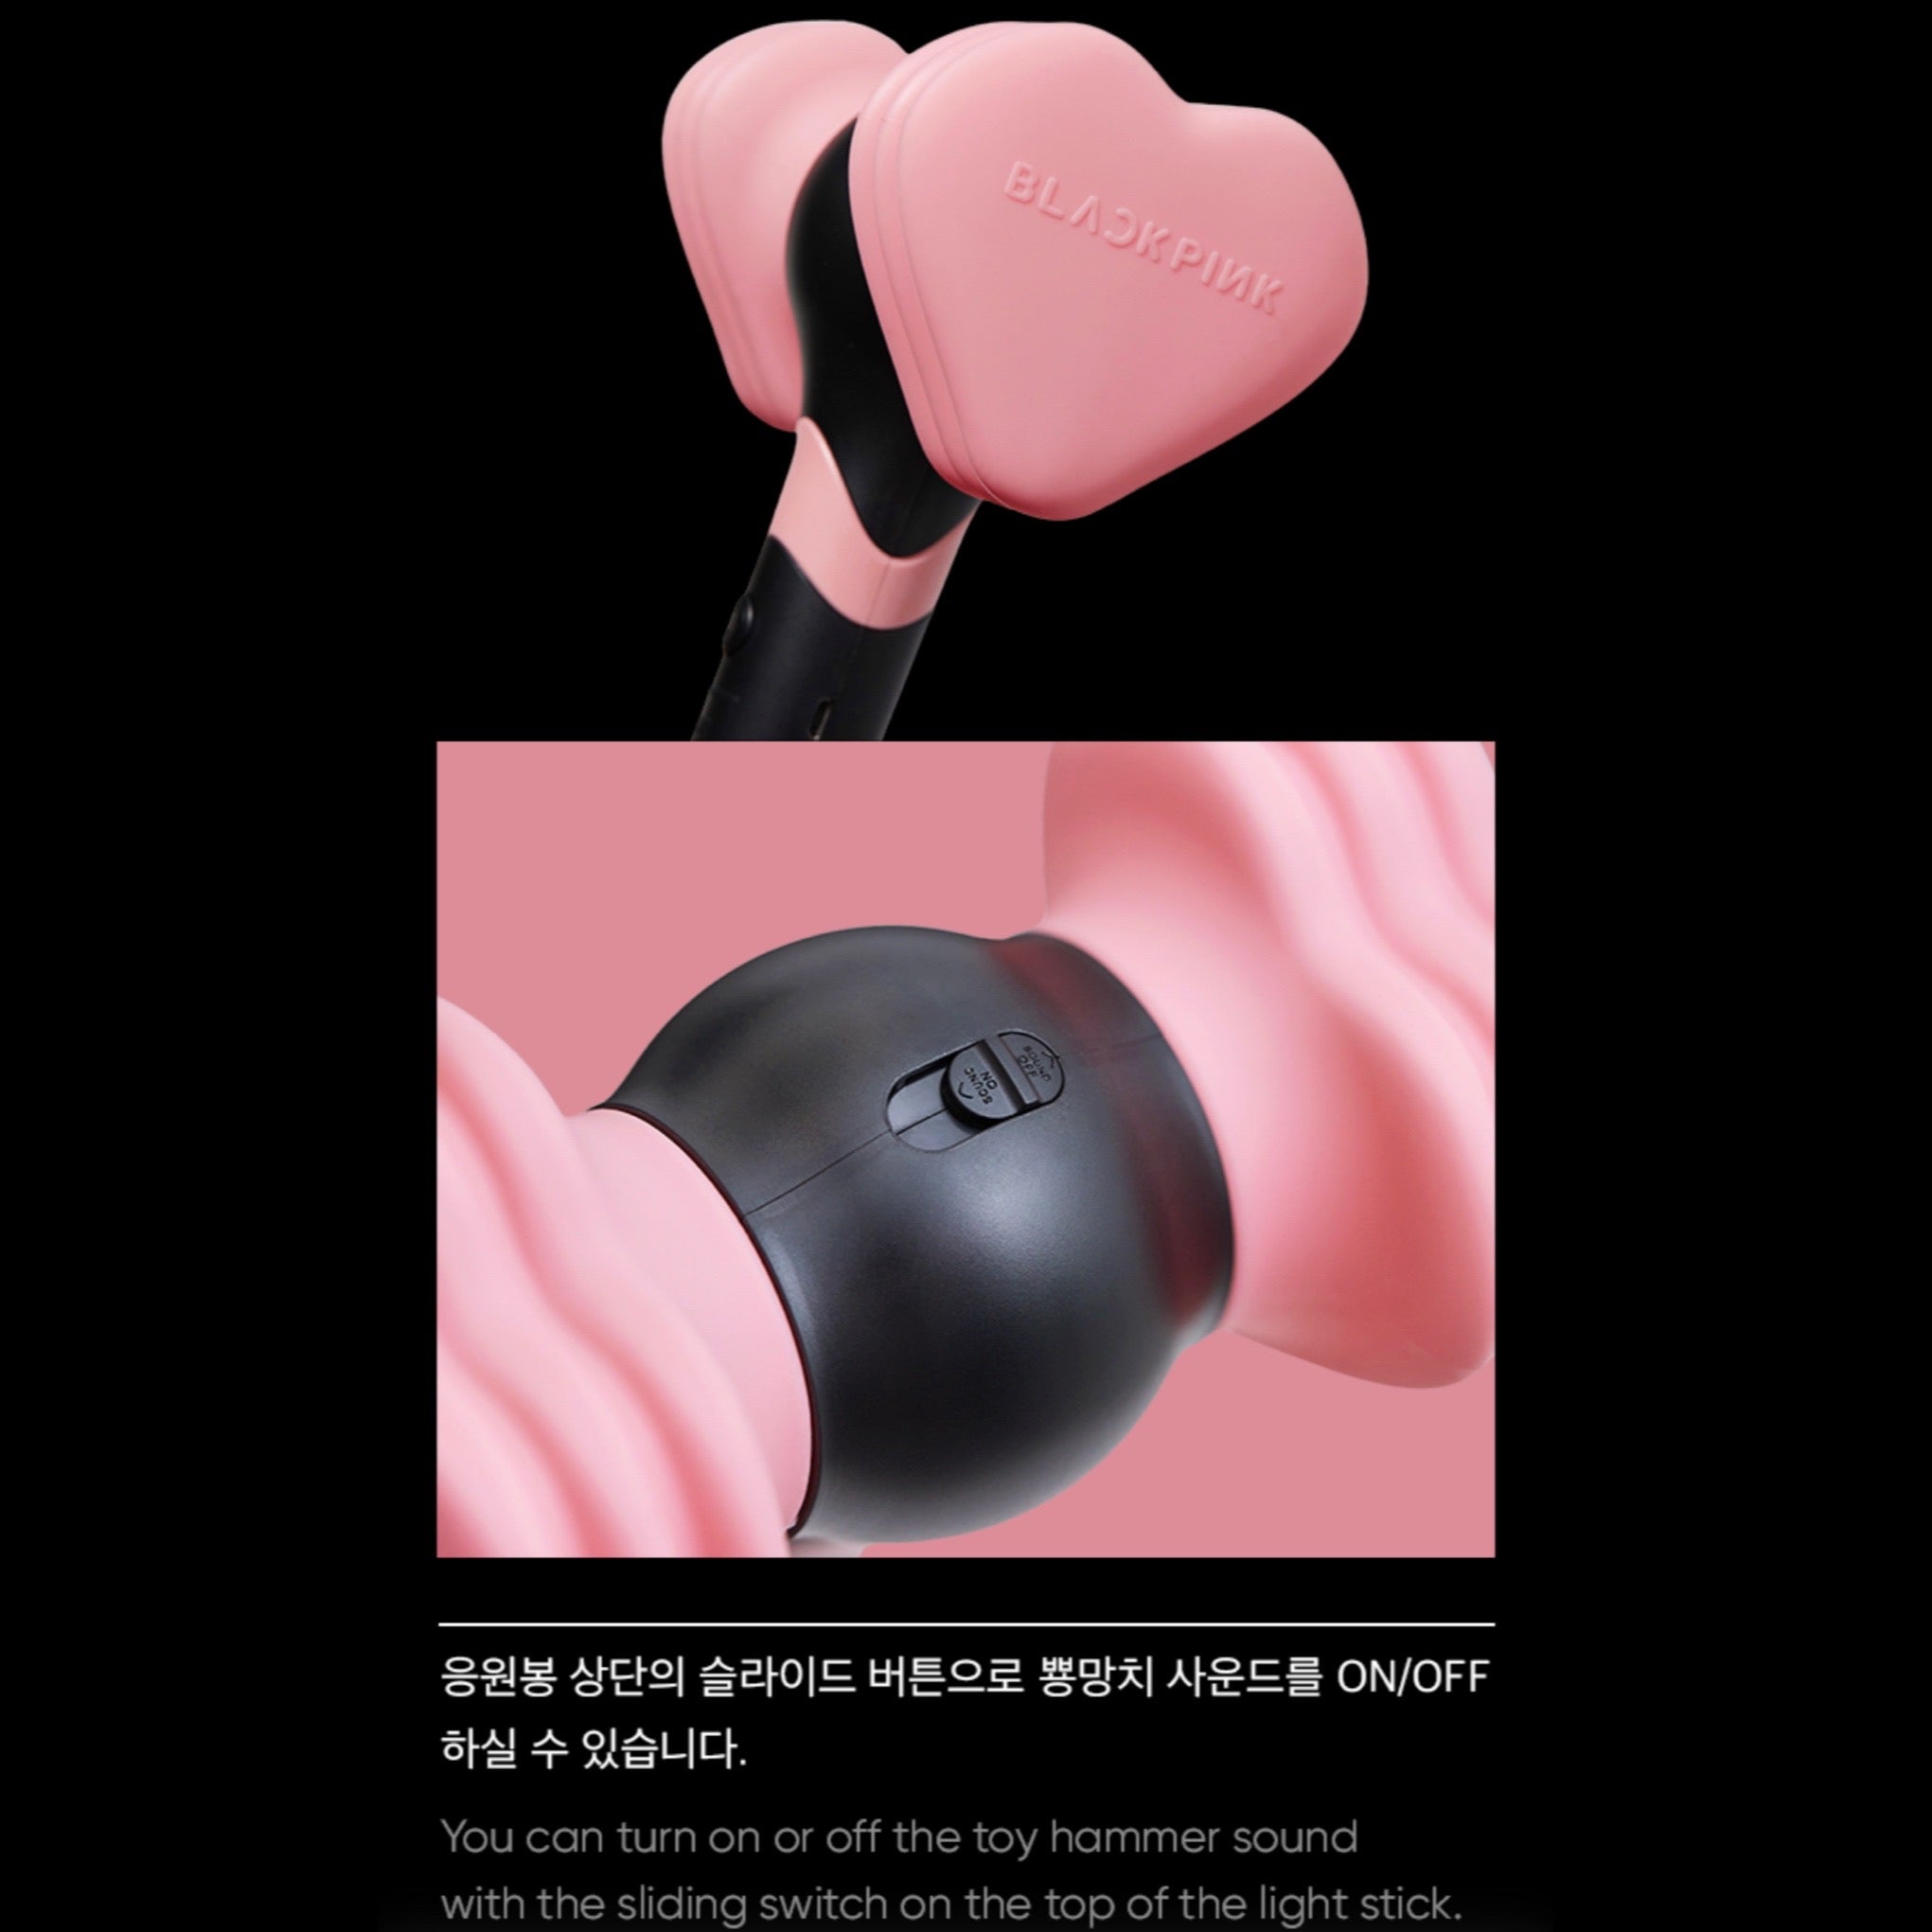 9621 - 📍🇦🇺 [New Arrivals] BLACKPINK - OFFICIAL VER 2 LIGHTSTICK # Blackpink 🔗www.with9621.com - If you are interested , please contact us  🙌🏼 - We are happy to take payment in store /